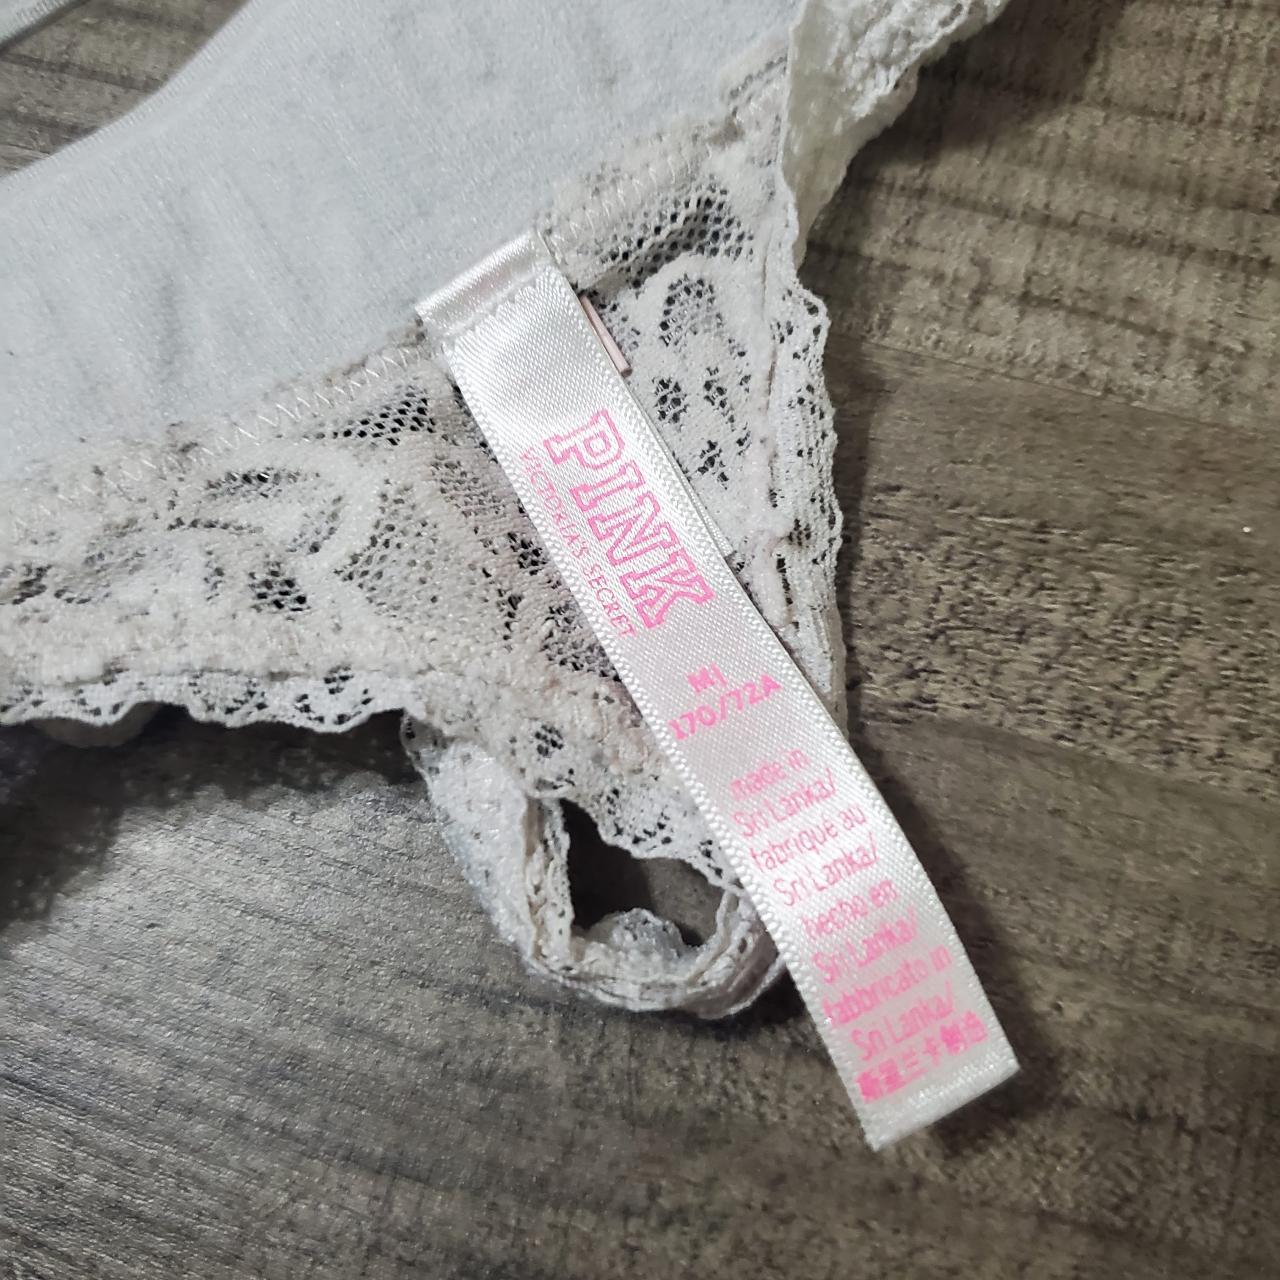 Women's Medium White Lace Thong Panty by Victoria's